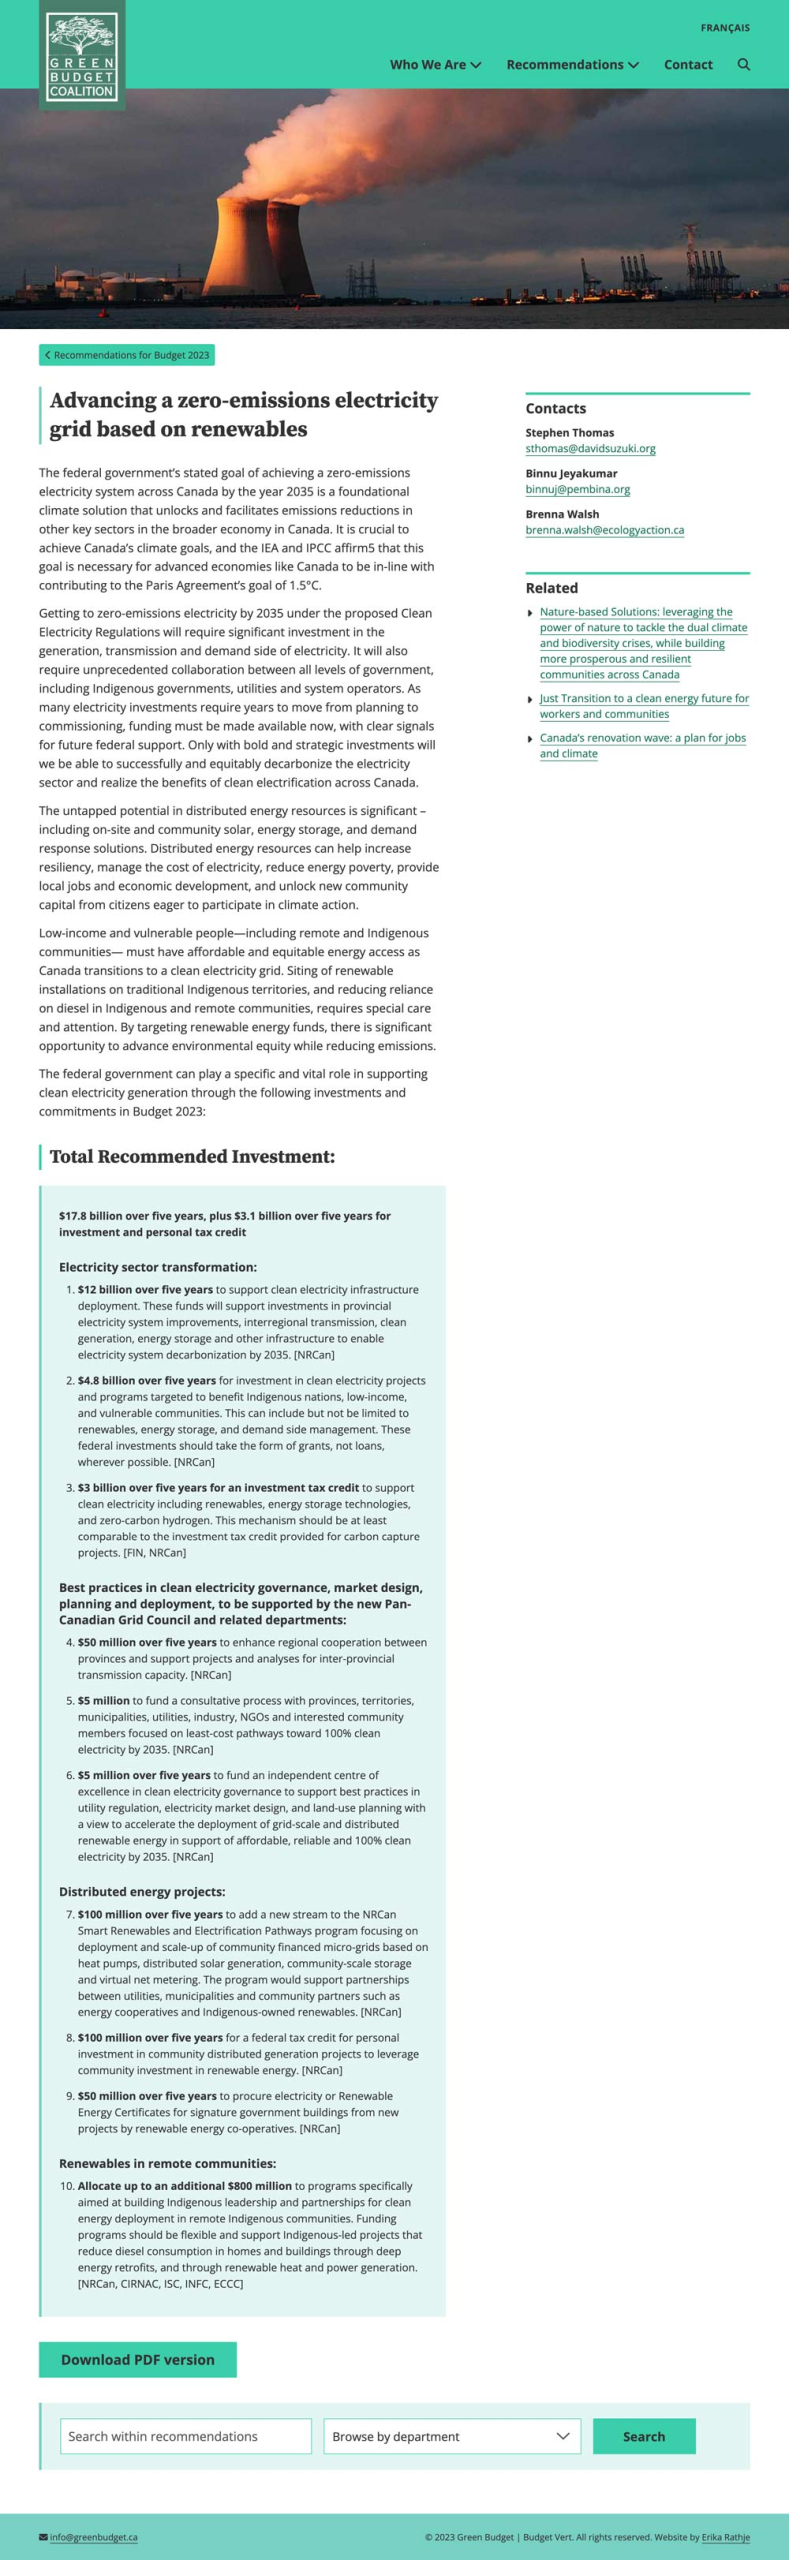 Green Budget Coalition individual recommendations page